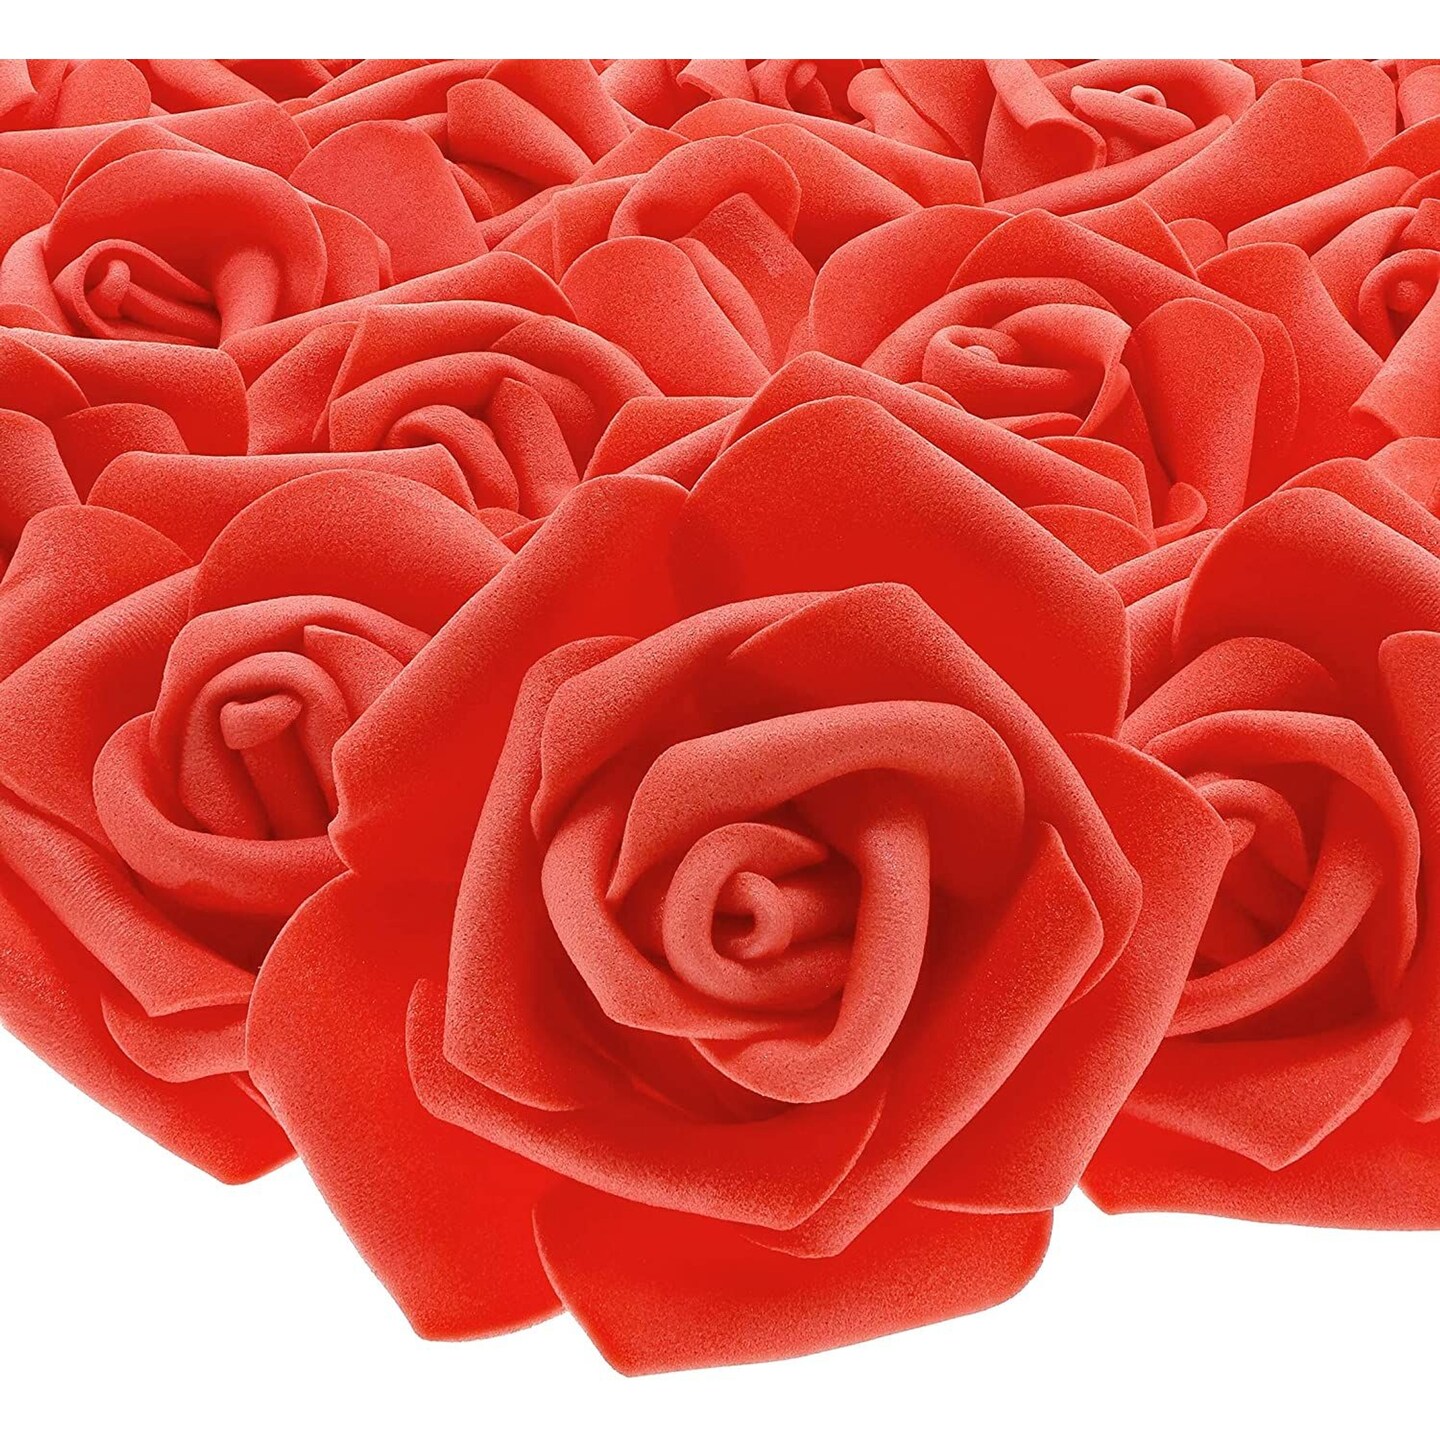 Ribbon Red Rose Flower Heads for Faux Floral Decor, Arts and Crafts (0.6 in, 200 Pack)